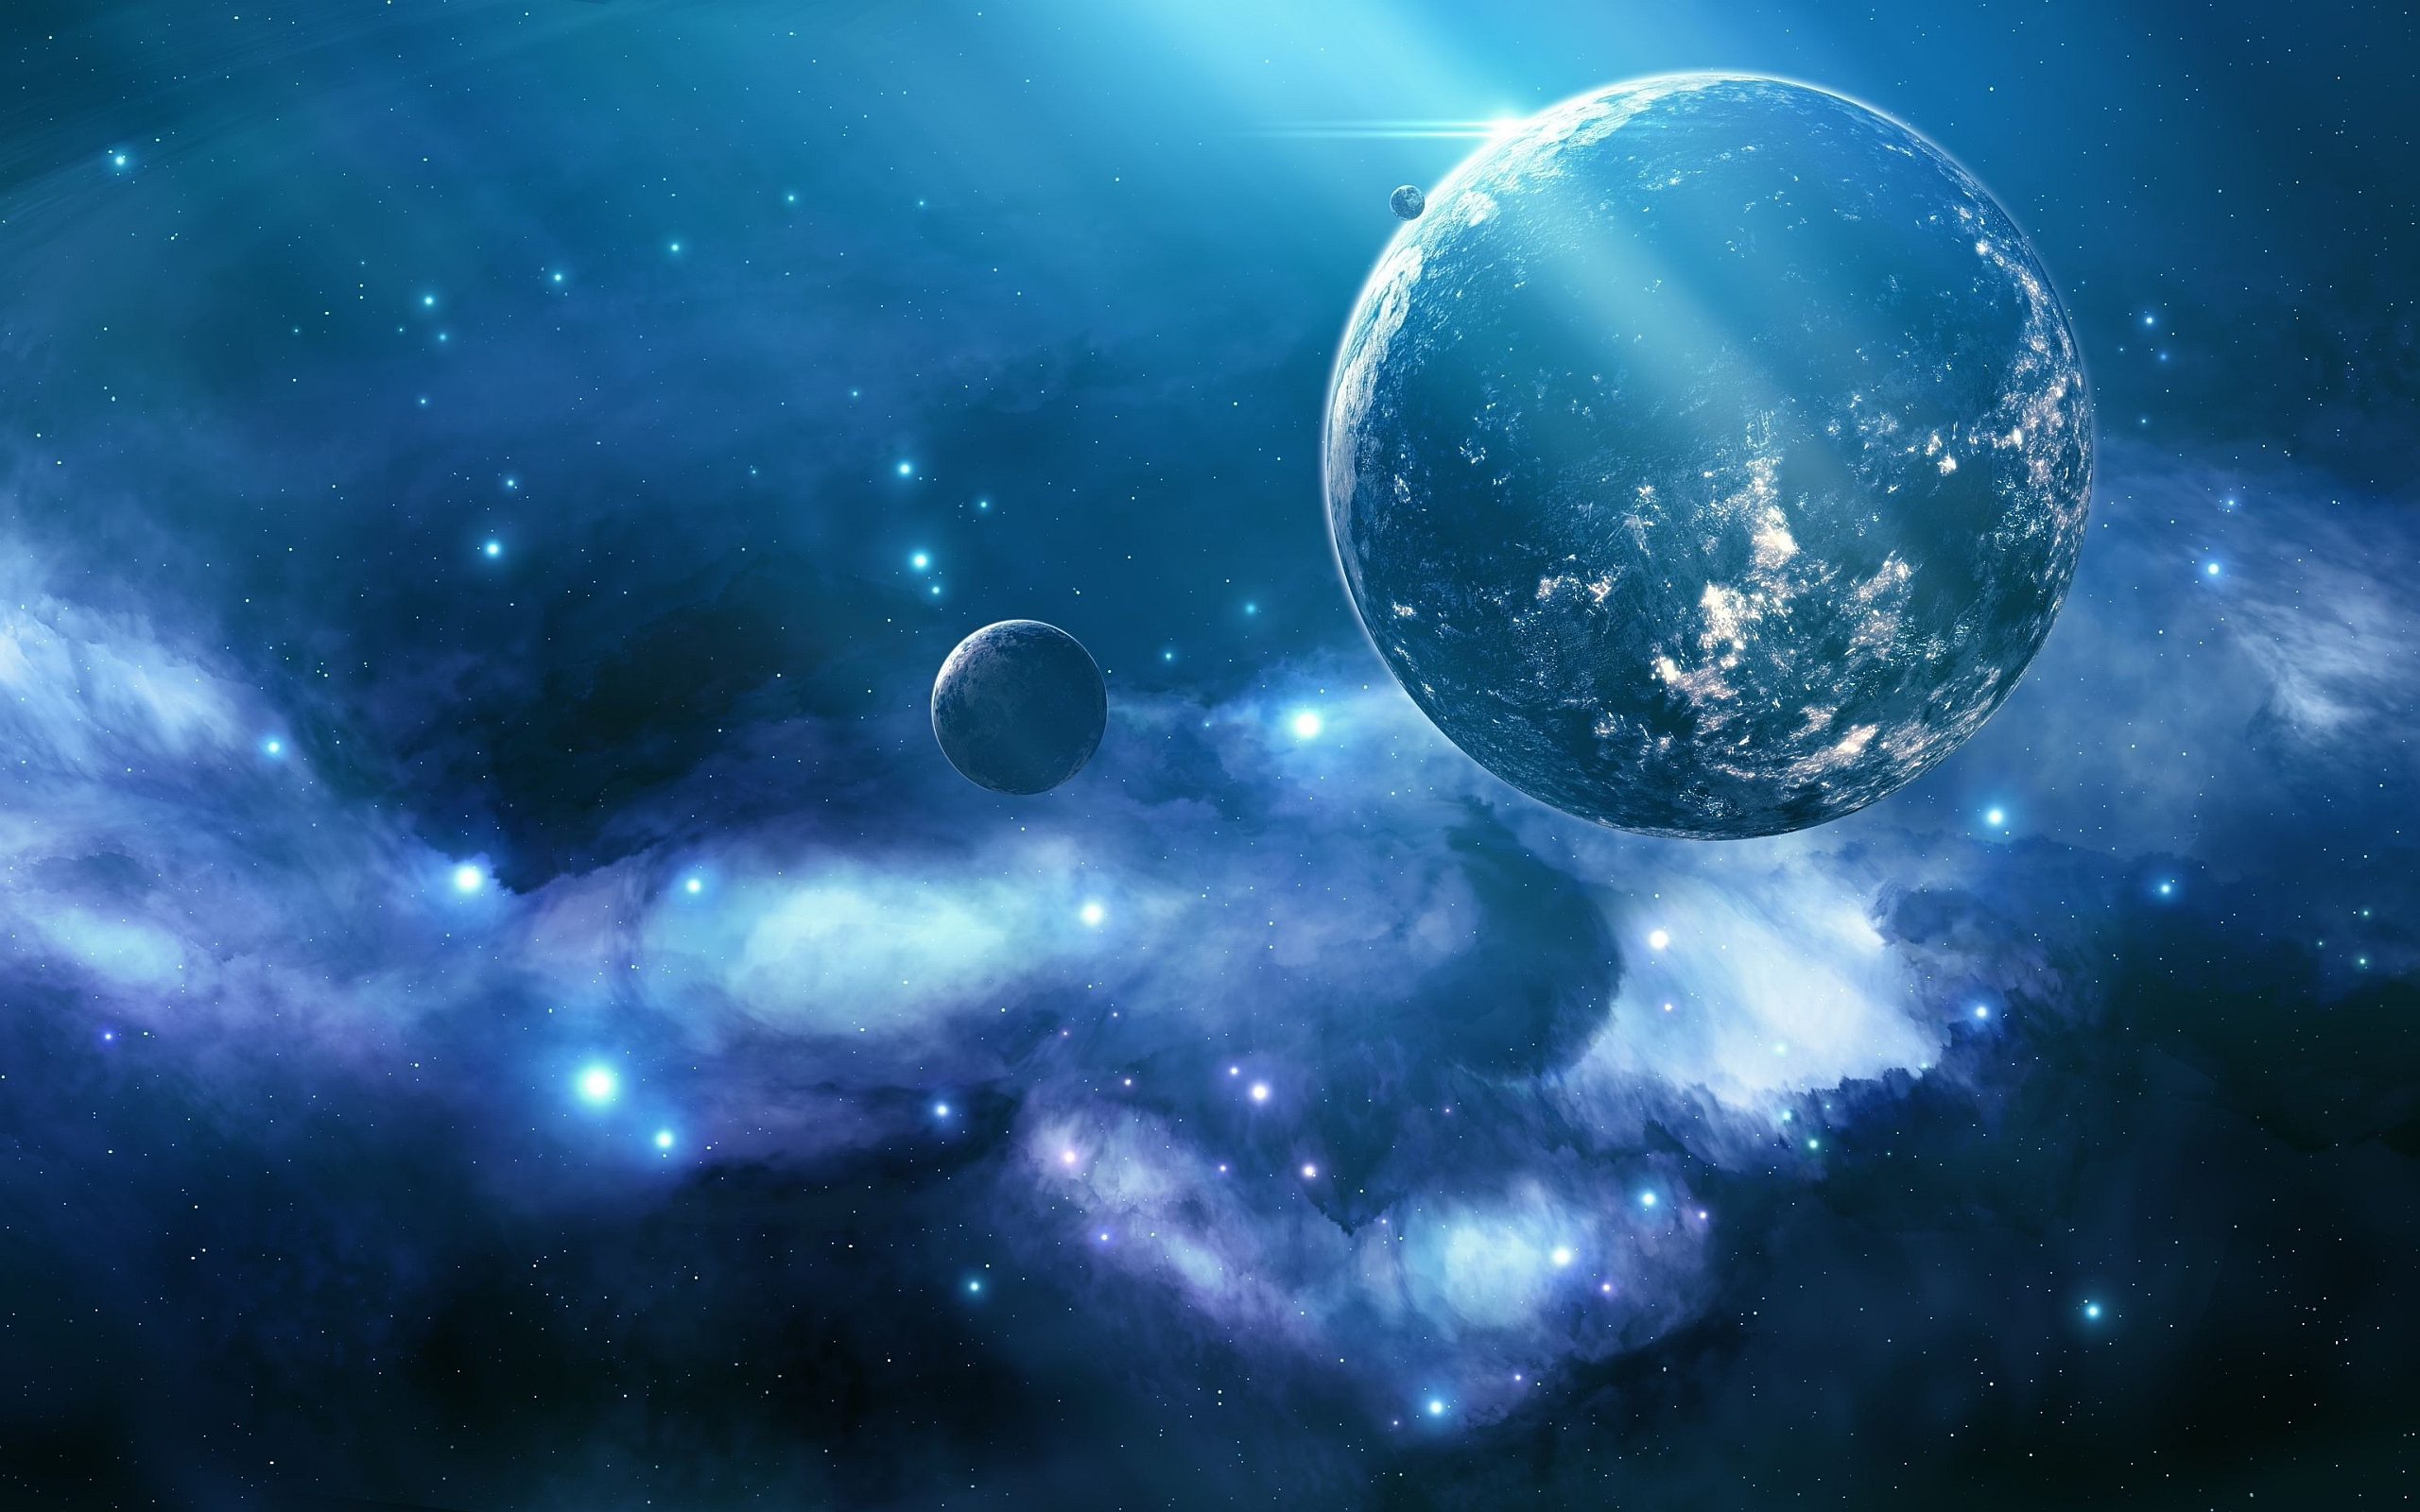 Painted Planets, Space Wallpaper - Blue Space Galaxy Background - HD Wallpaper 